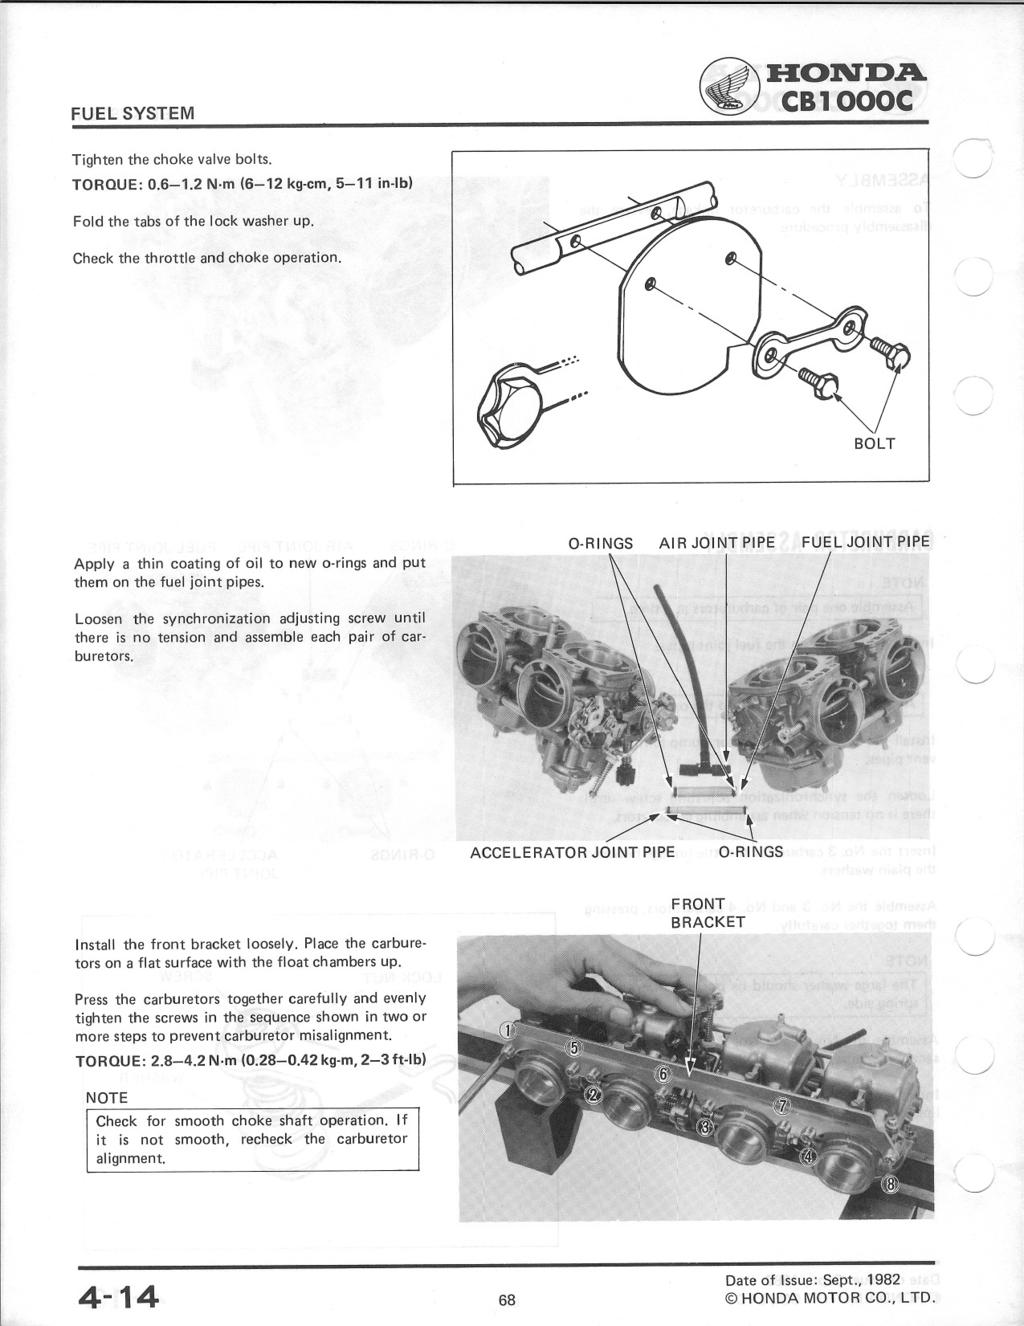 FUEL SYSTEM ~ ~HONDA,CB1000C Tighten the choke valve bolts, TORQUE: 0.6-1.2 N m (6-12 kg-em, 5-11 in-ib) Fold the tabs of the lock washer up. Check the throttle and choke operation. -...~ tj" ~.